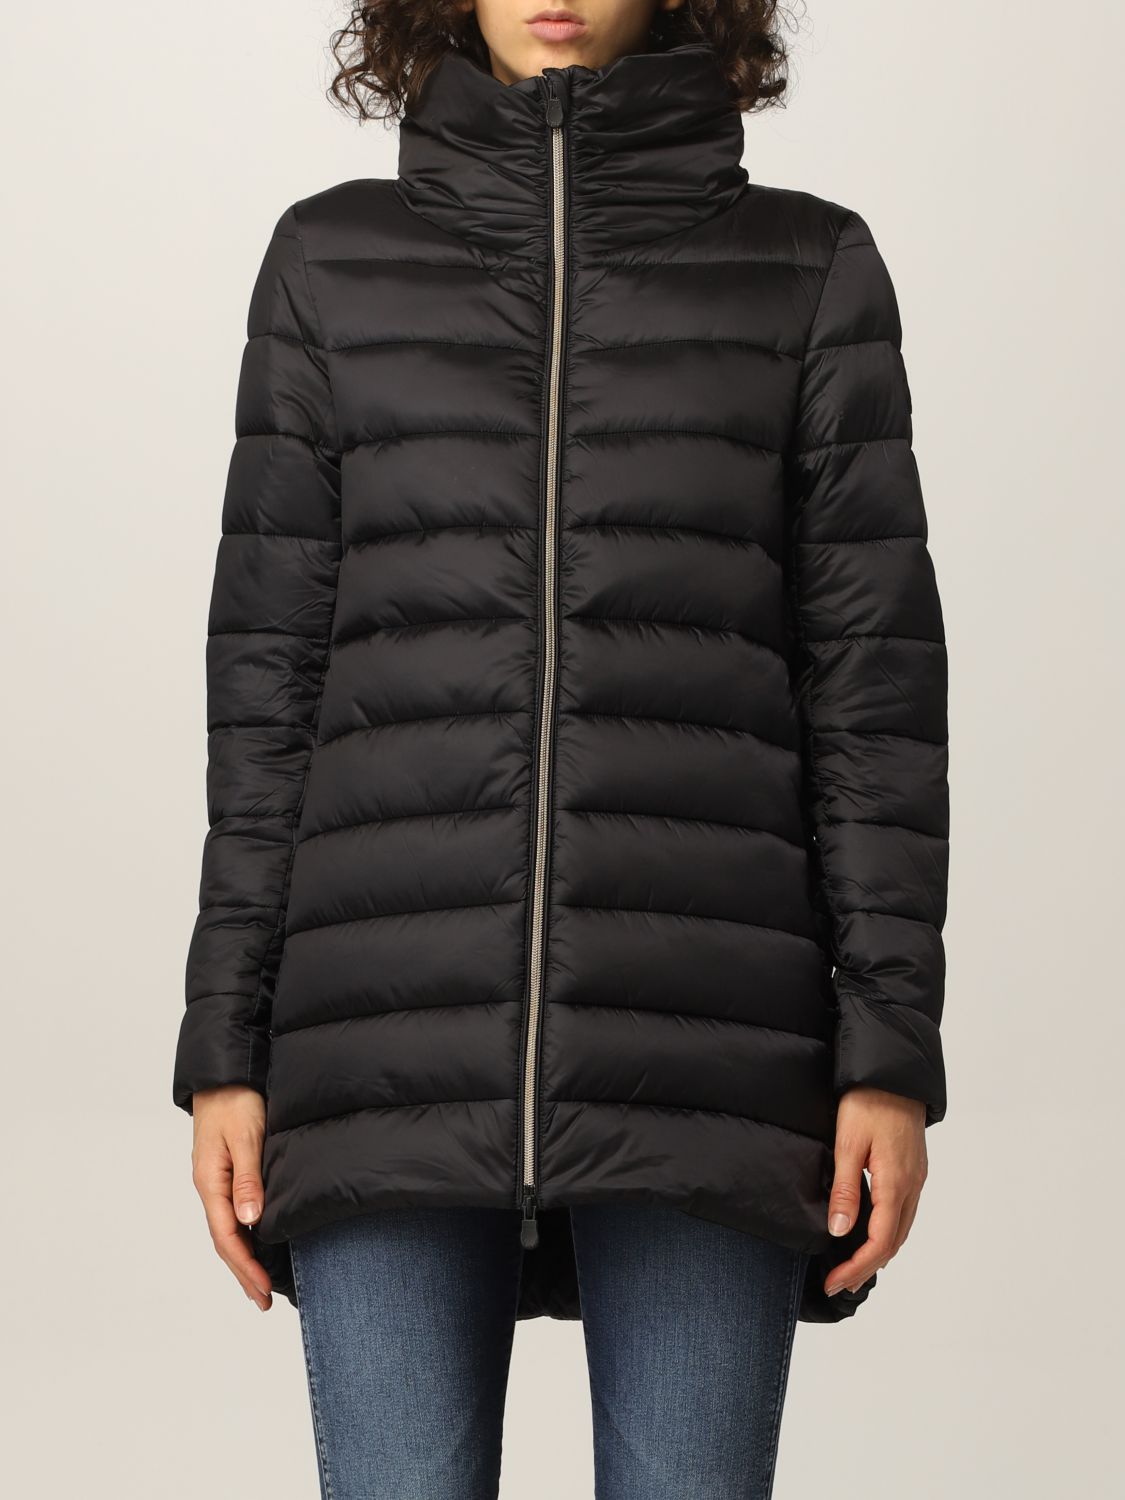 Jacket Save The Duck: Jacket women Save The Duck black 1